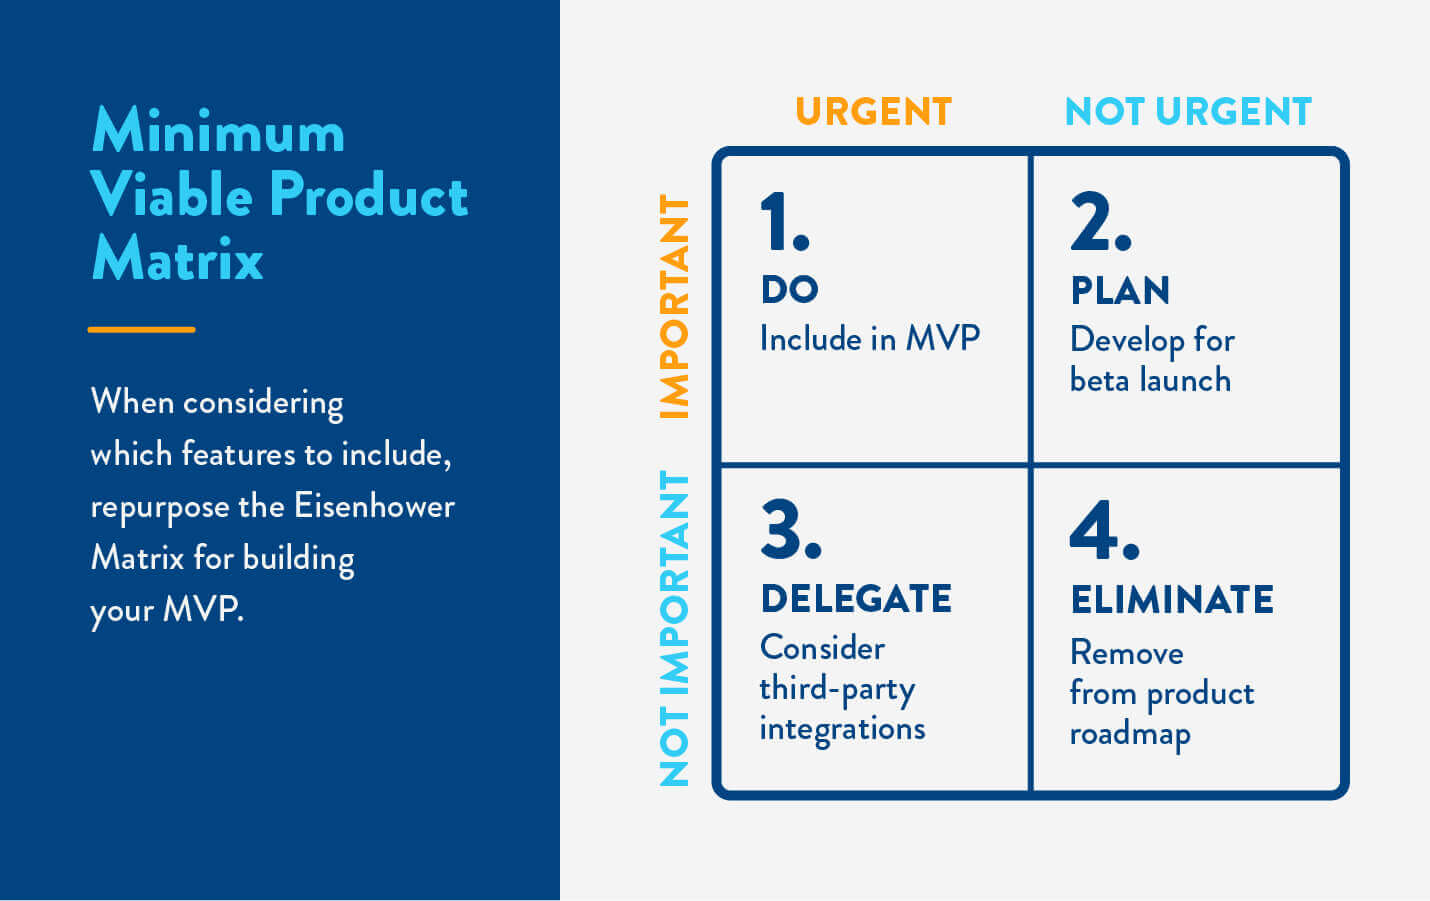 What Is A Minimum Viable Product + Methodologies For Marketers